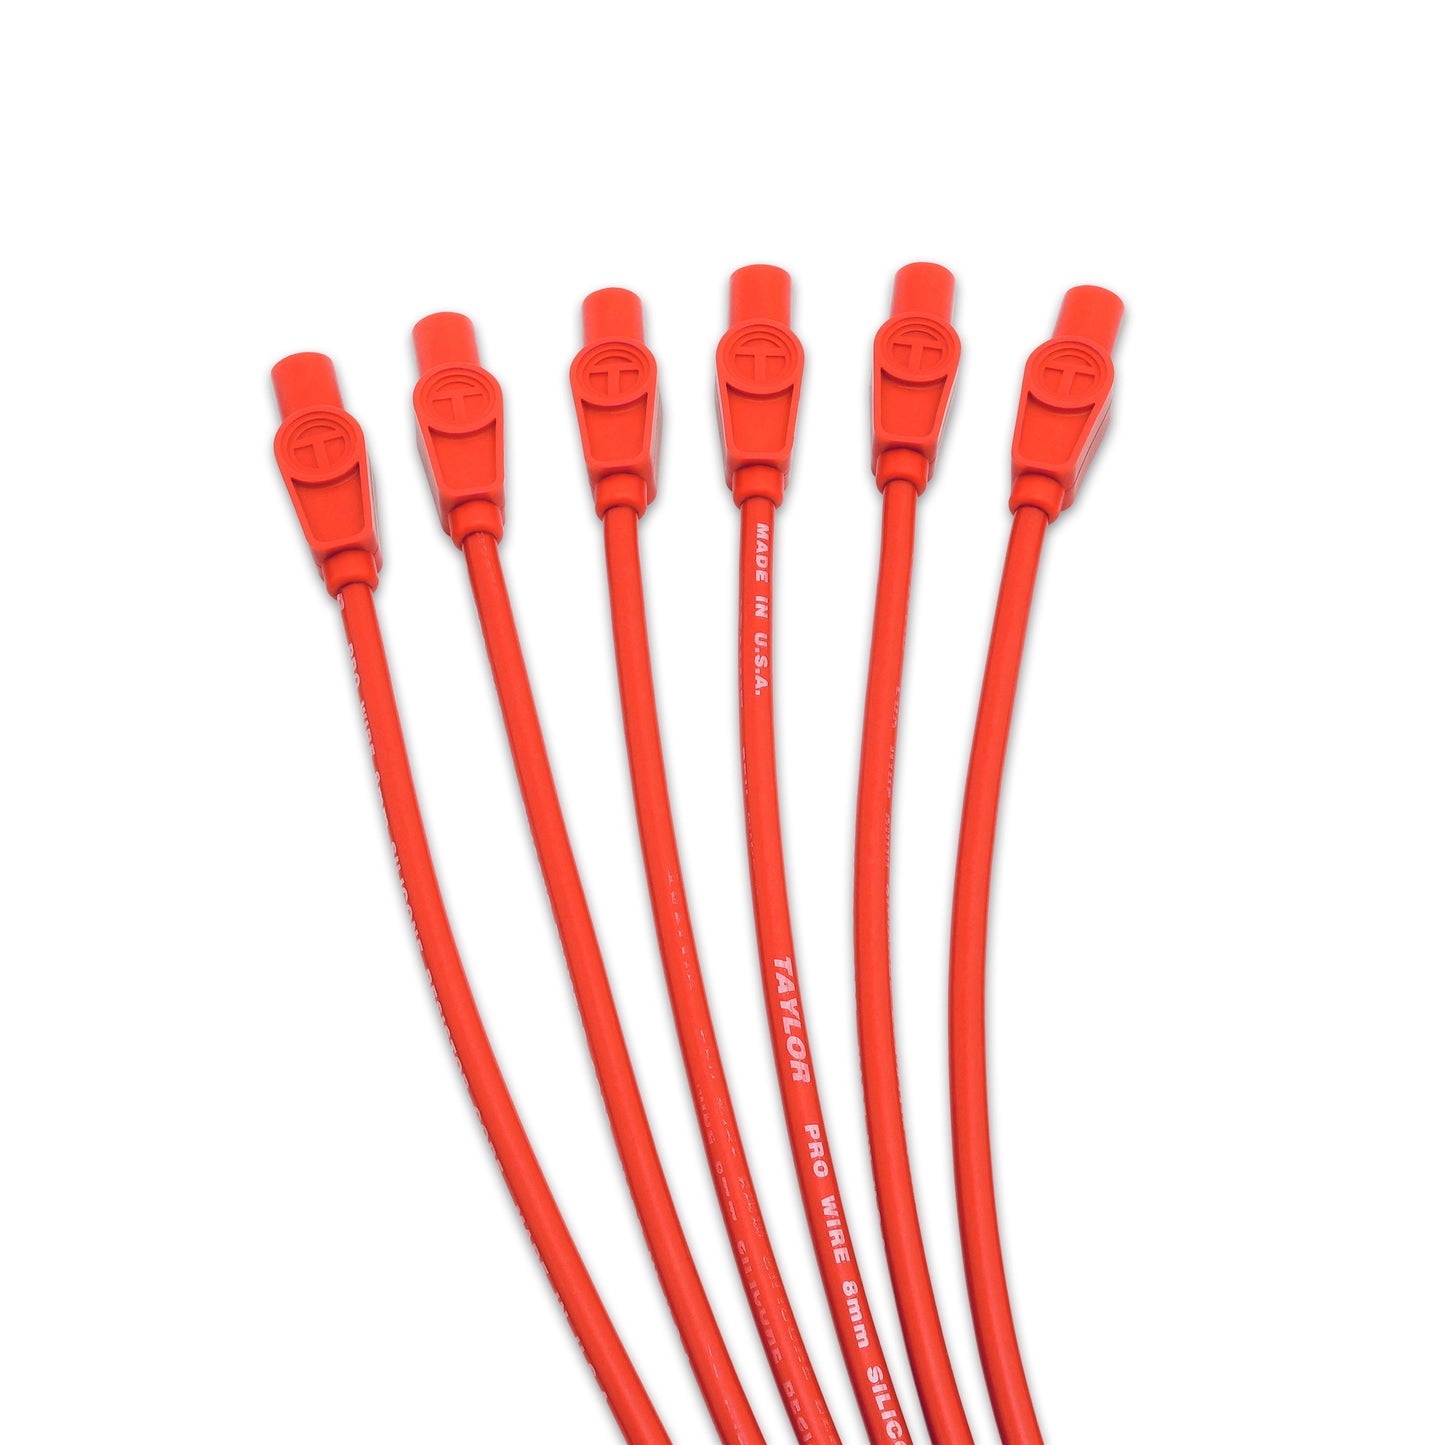 Taylor Cable 8mm 70245 Pro RC Ignition Wires univ 6 cyl 180 red